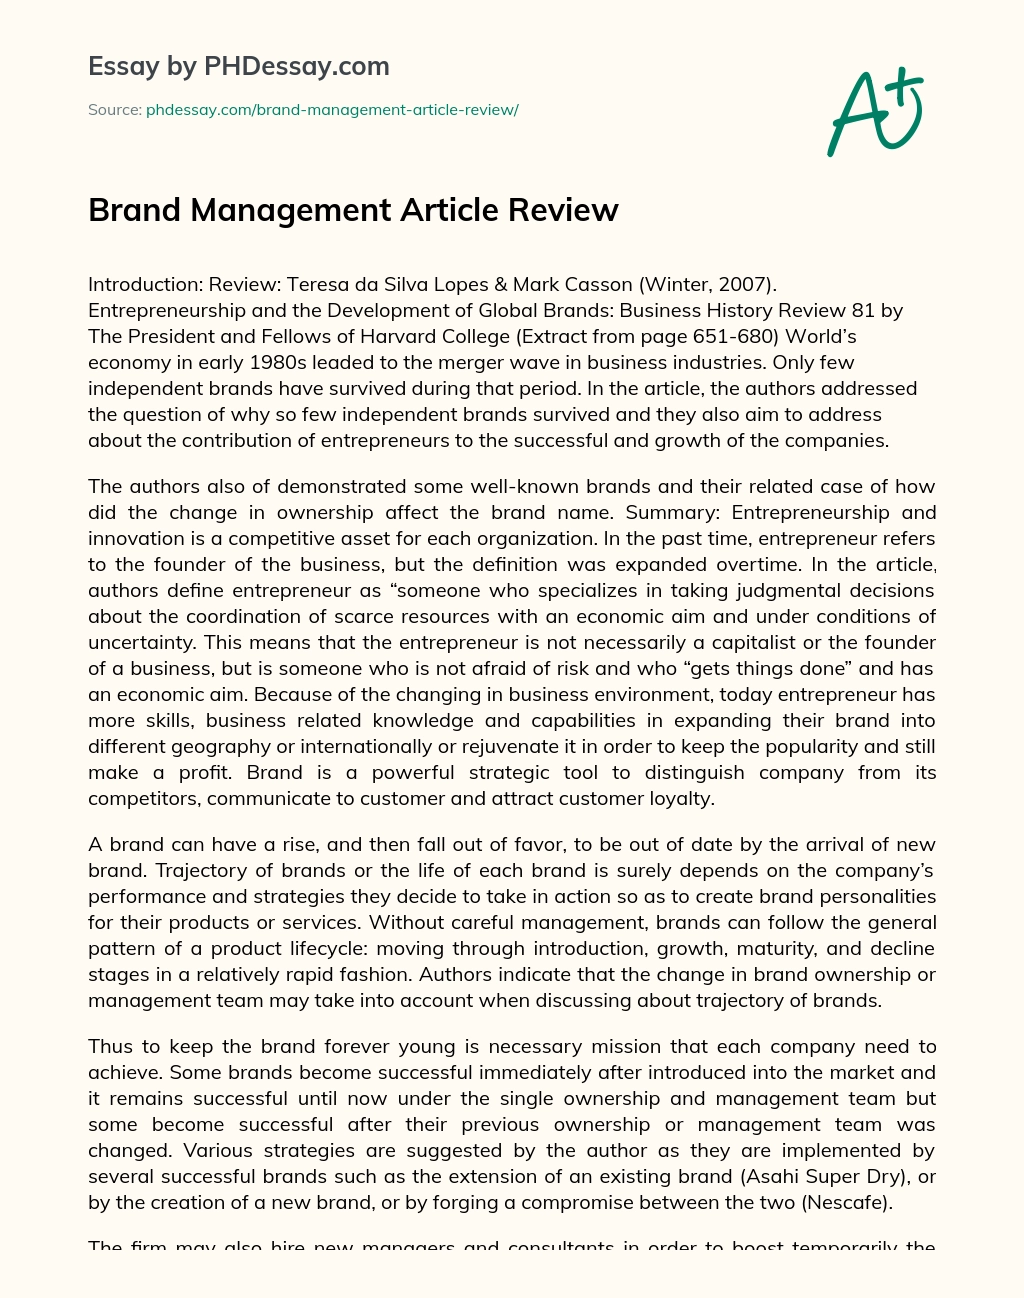 Brand Management Article Review essay